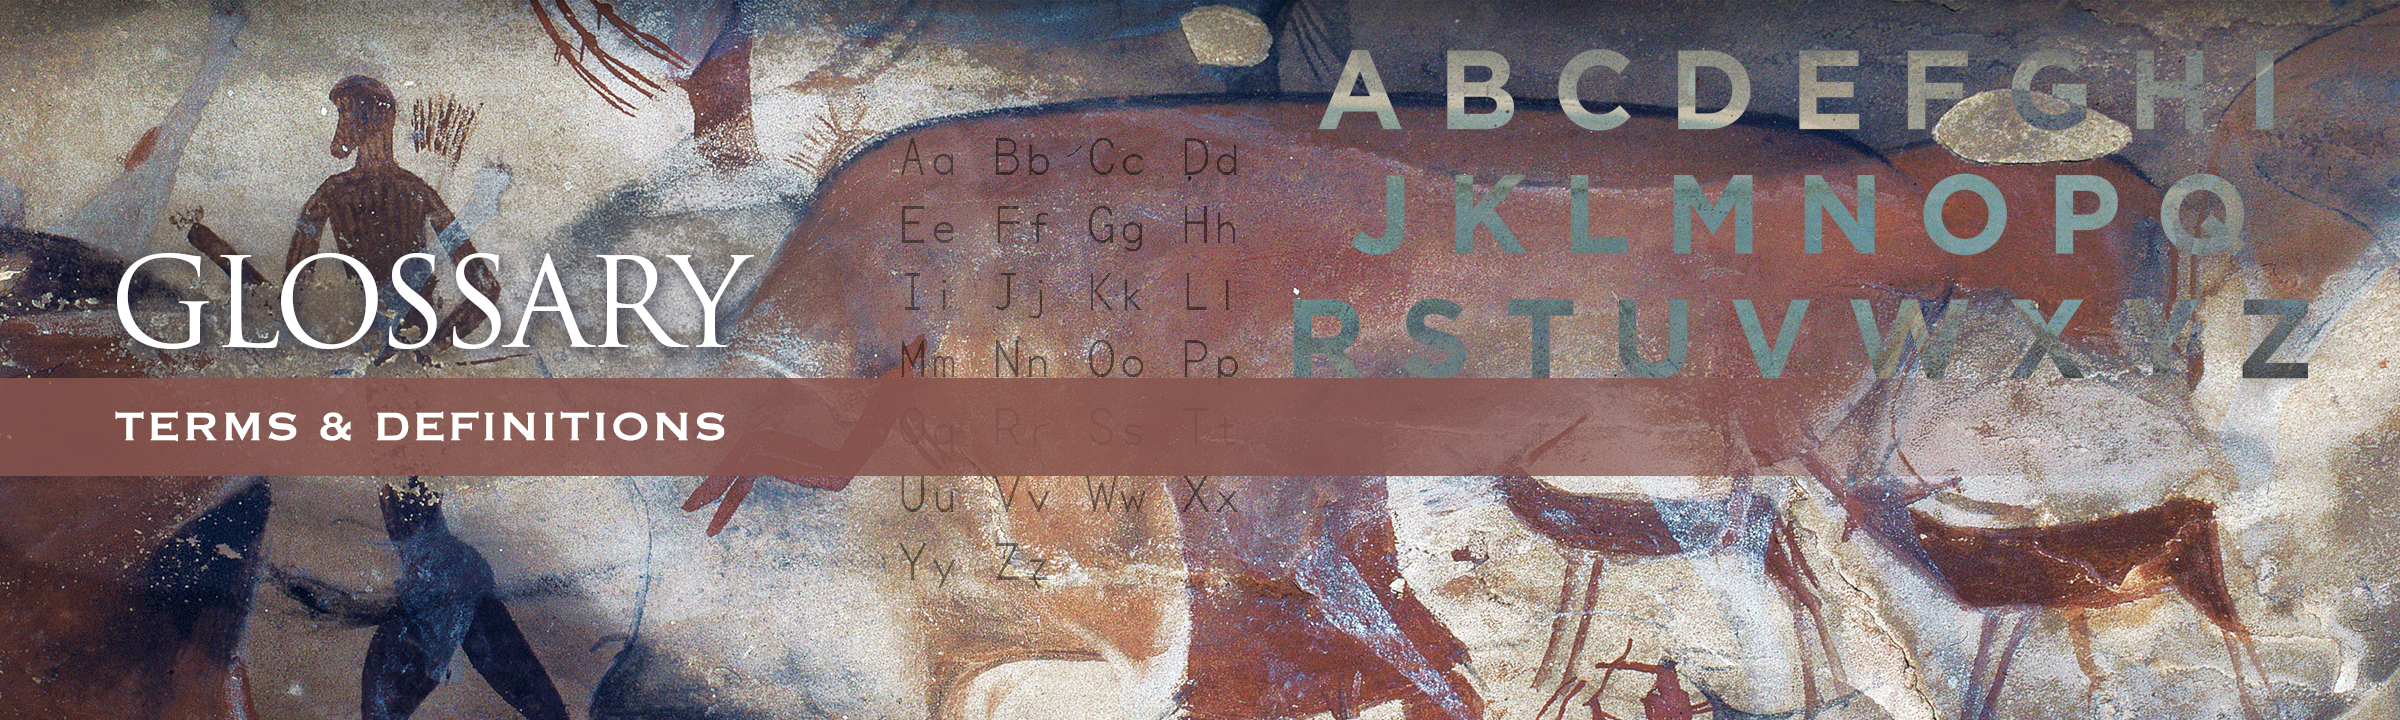 Bradshaw Foundation Glossary Rock Art Terms Definitions